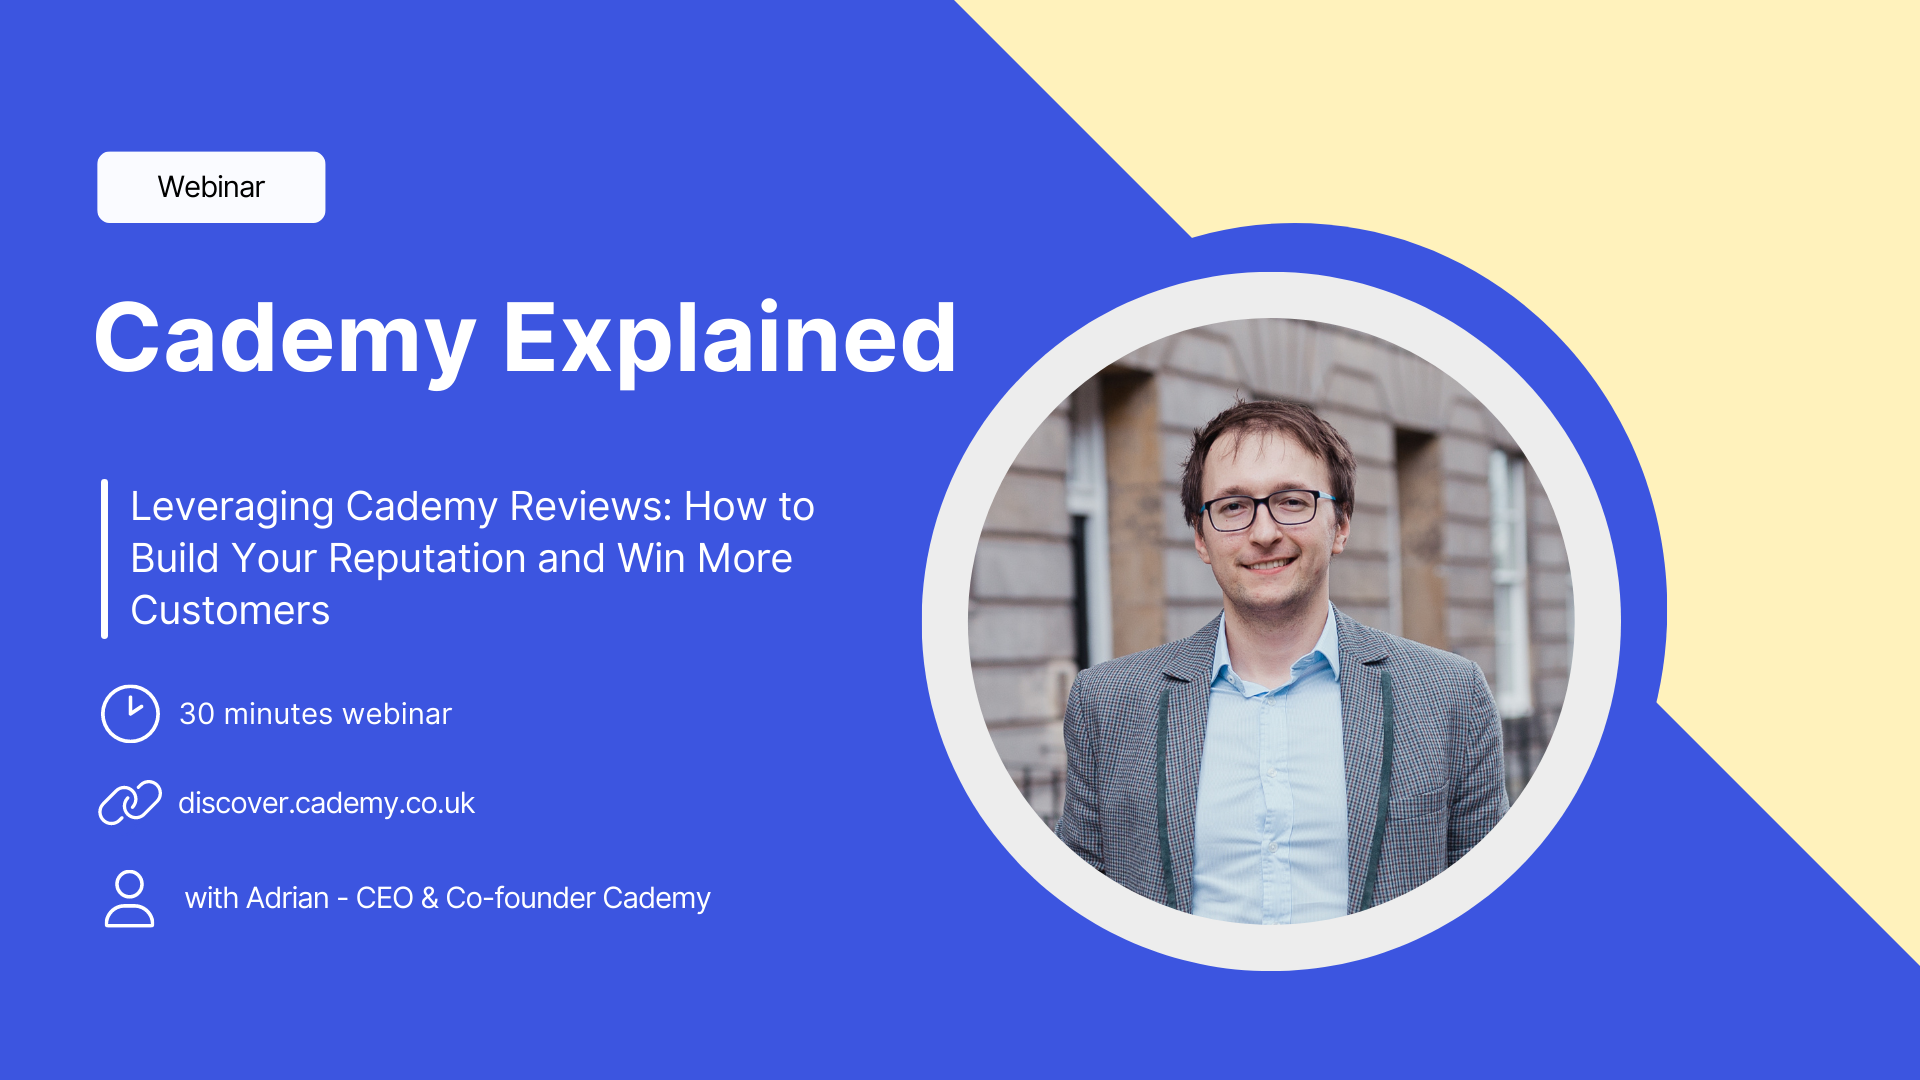 Leveraging Cademy Reviews: How to Build Your Reputation and Win More Customers